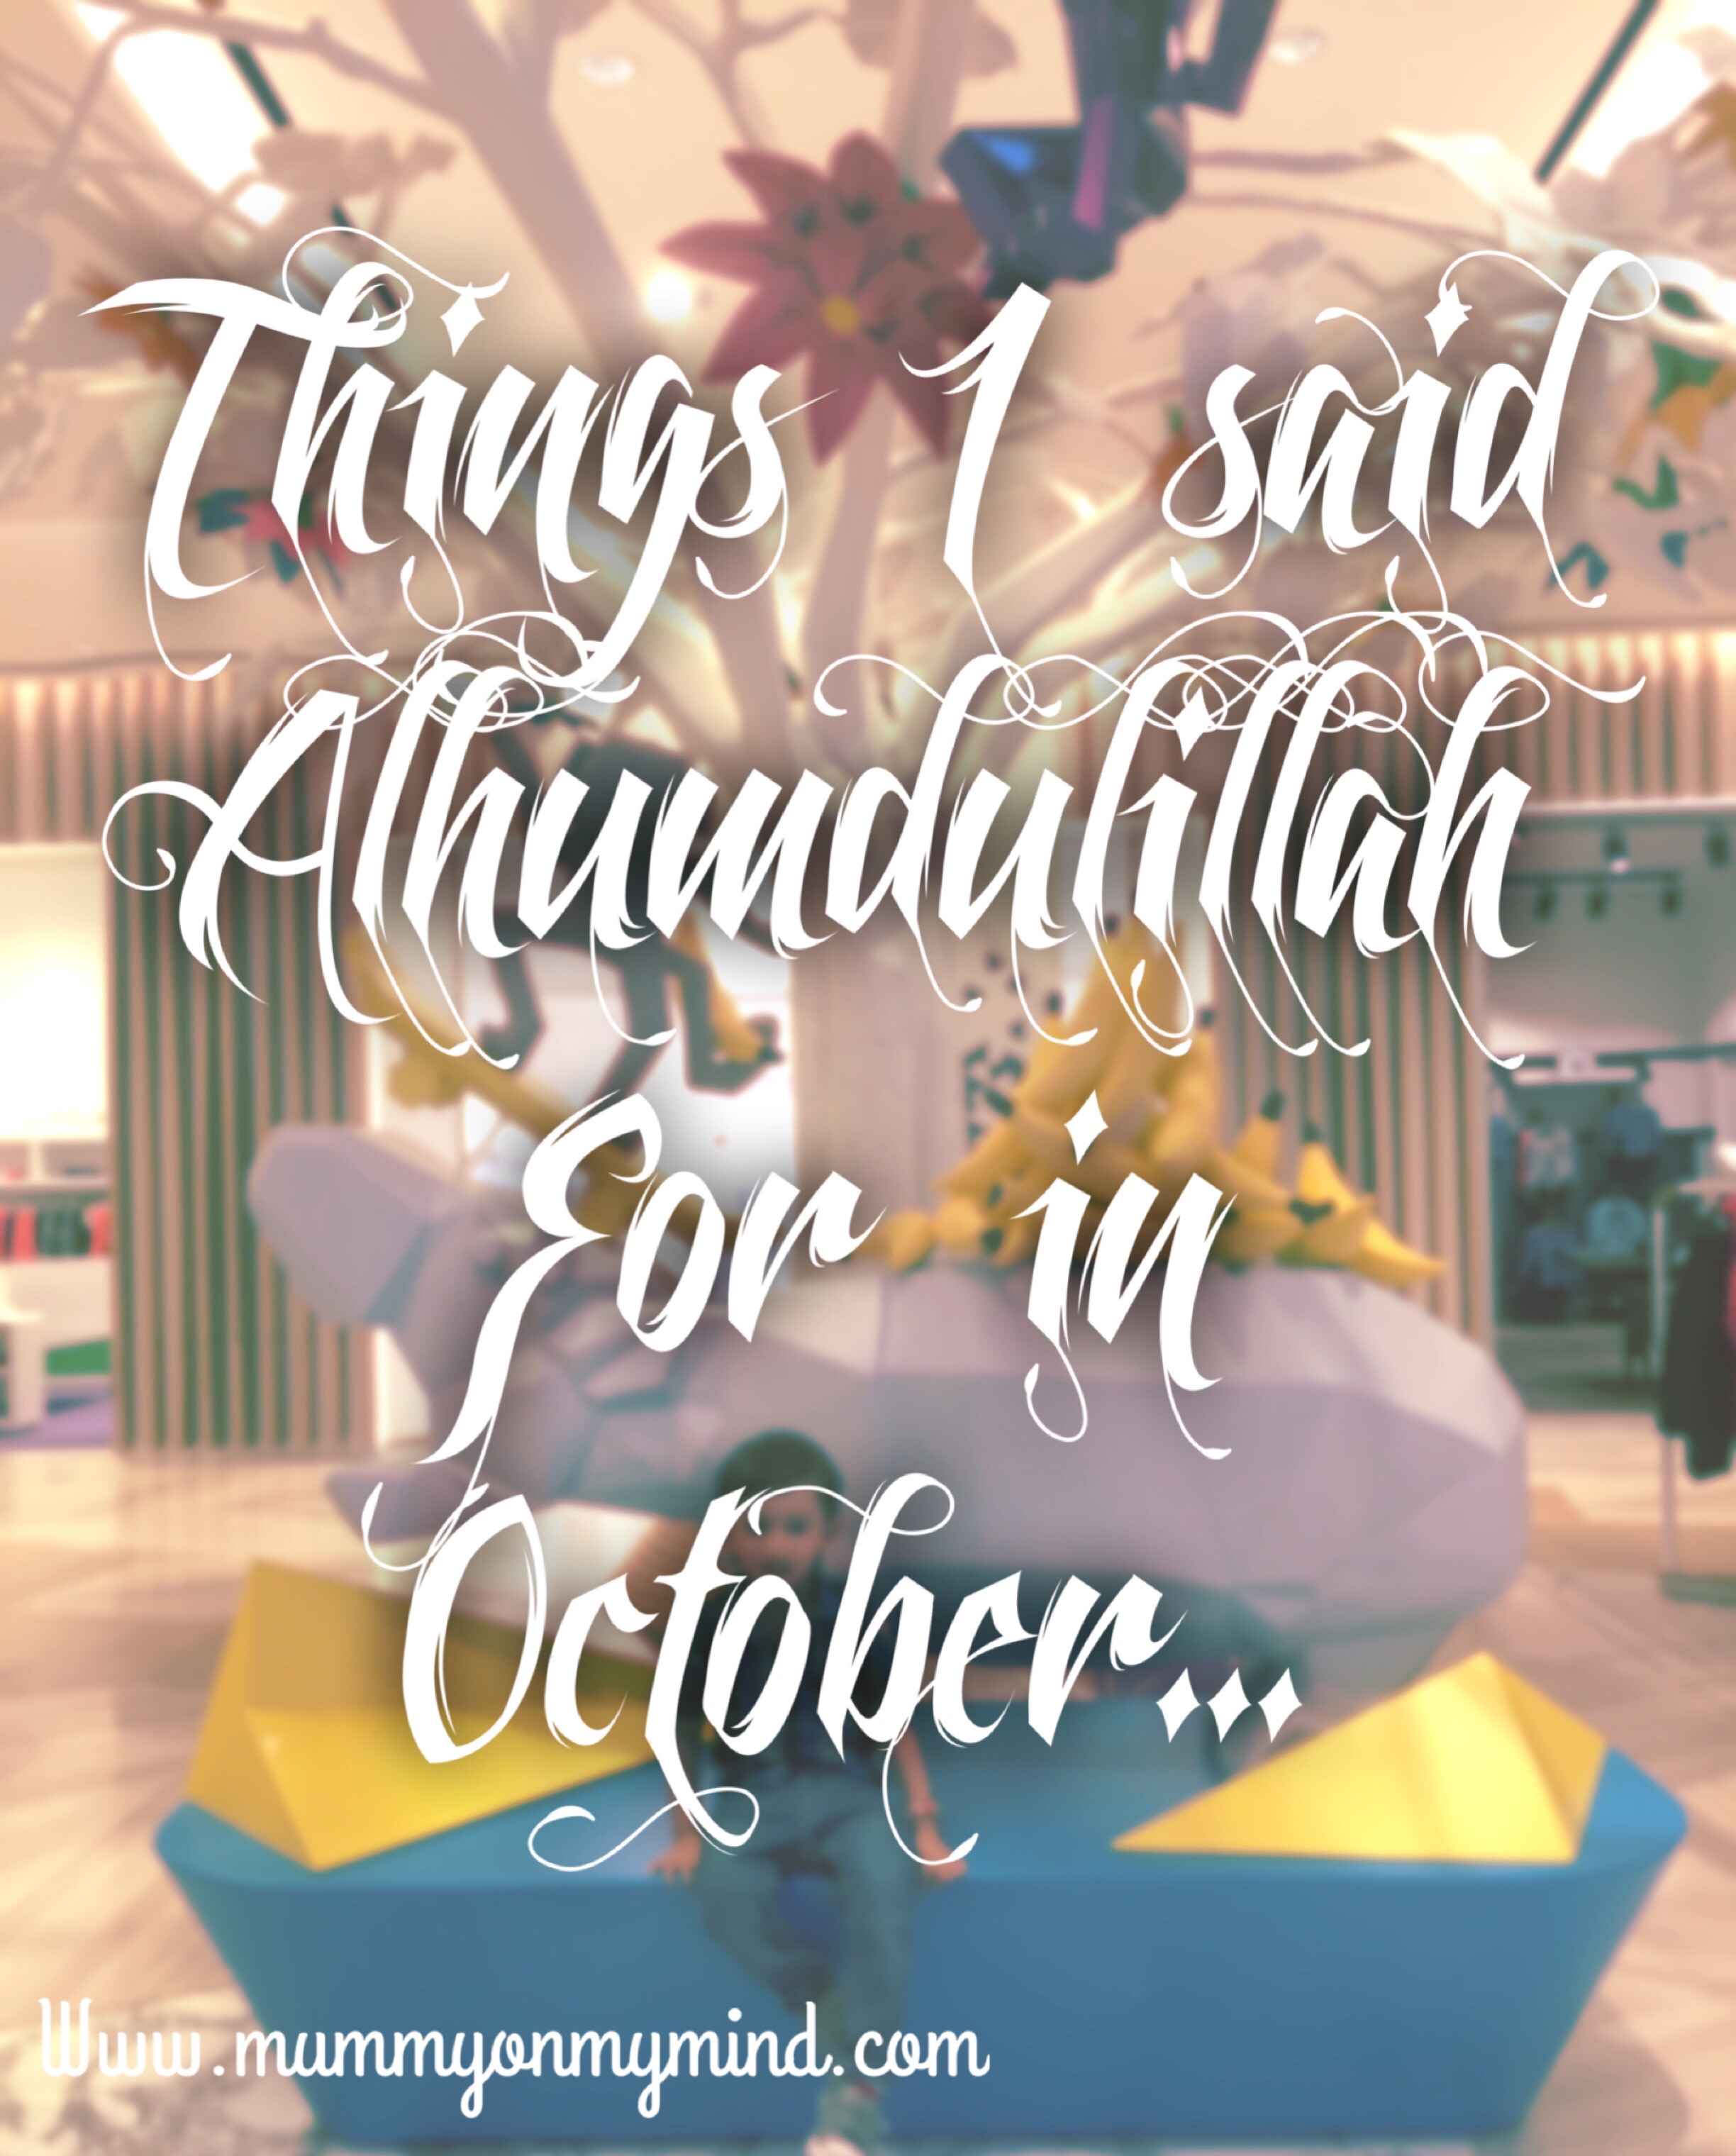 Things I said Alhumdulillah for in October 2016…